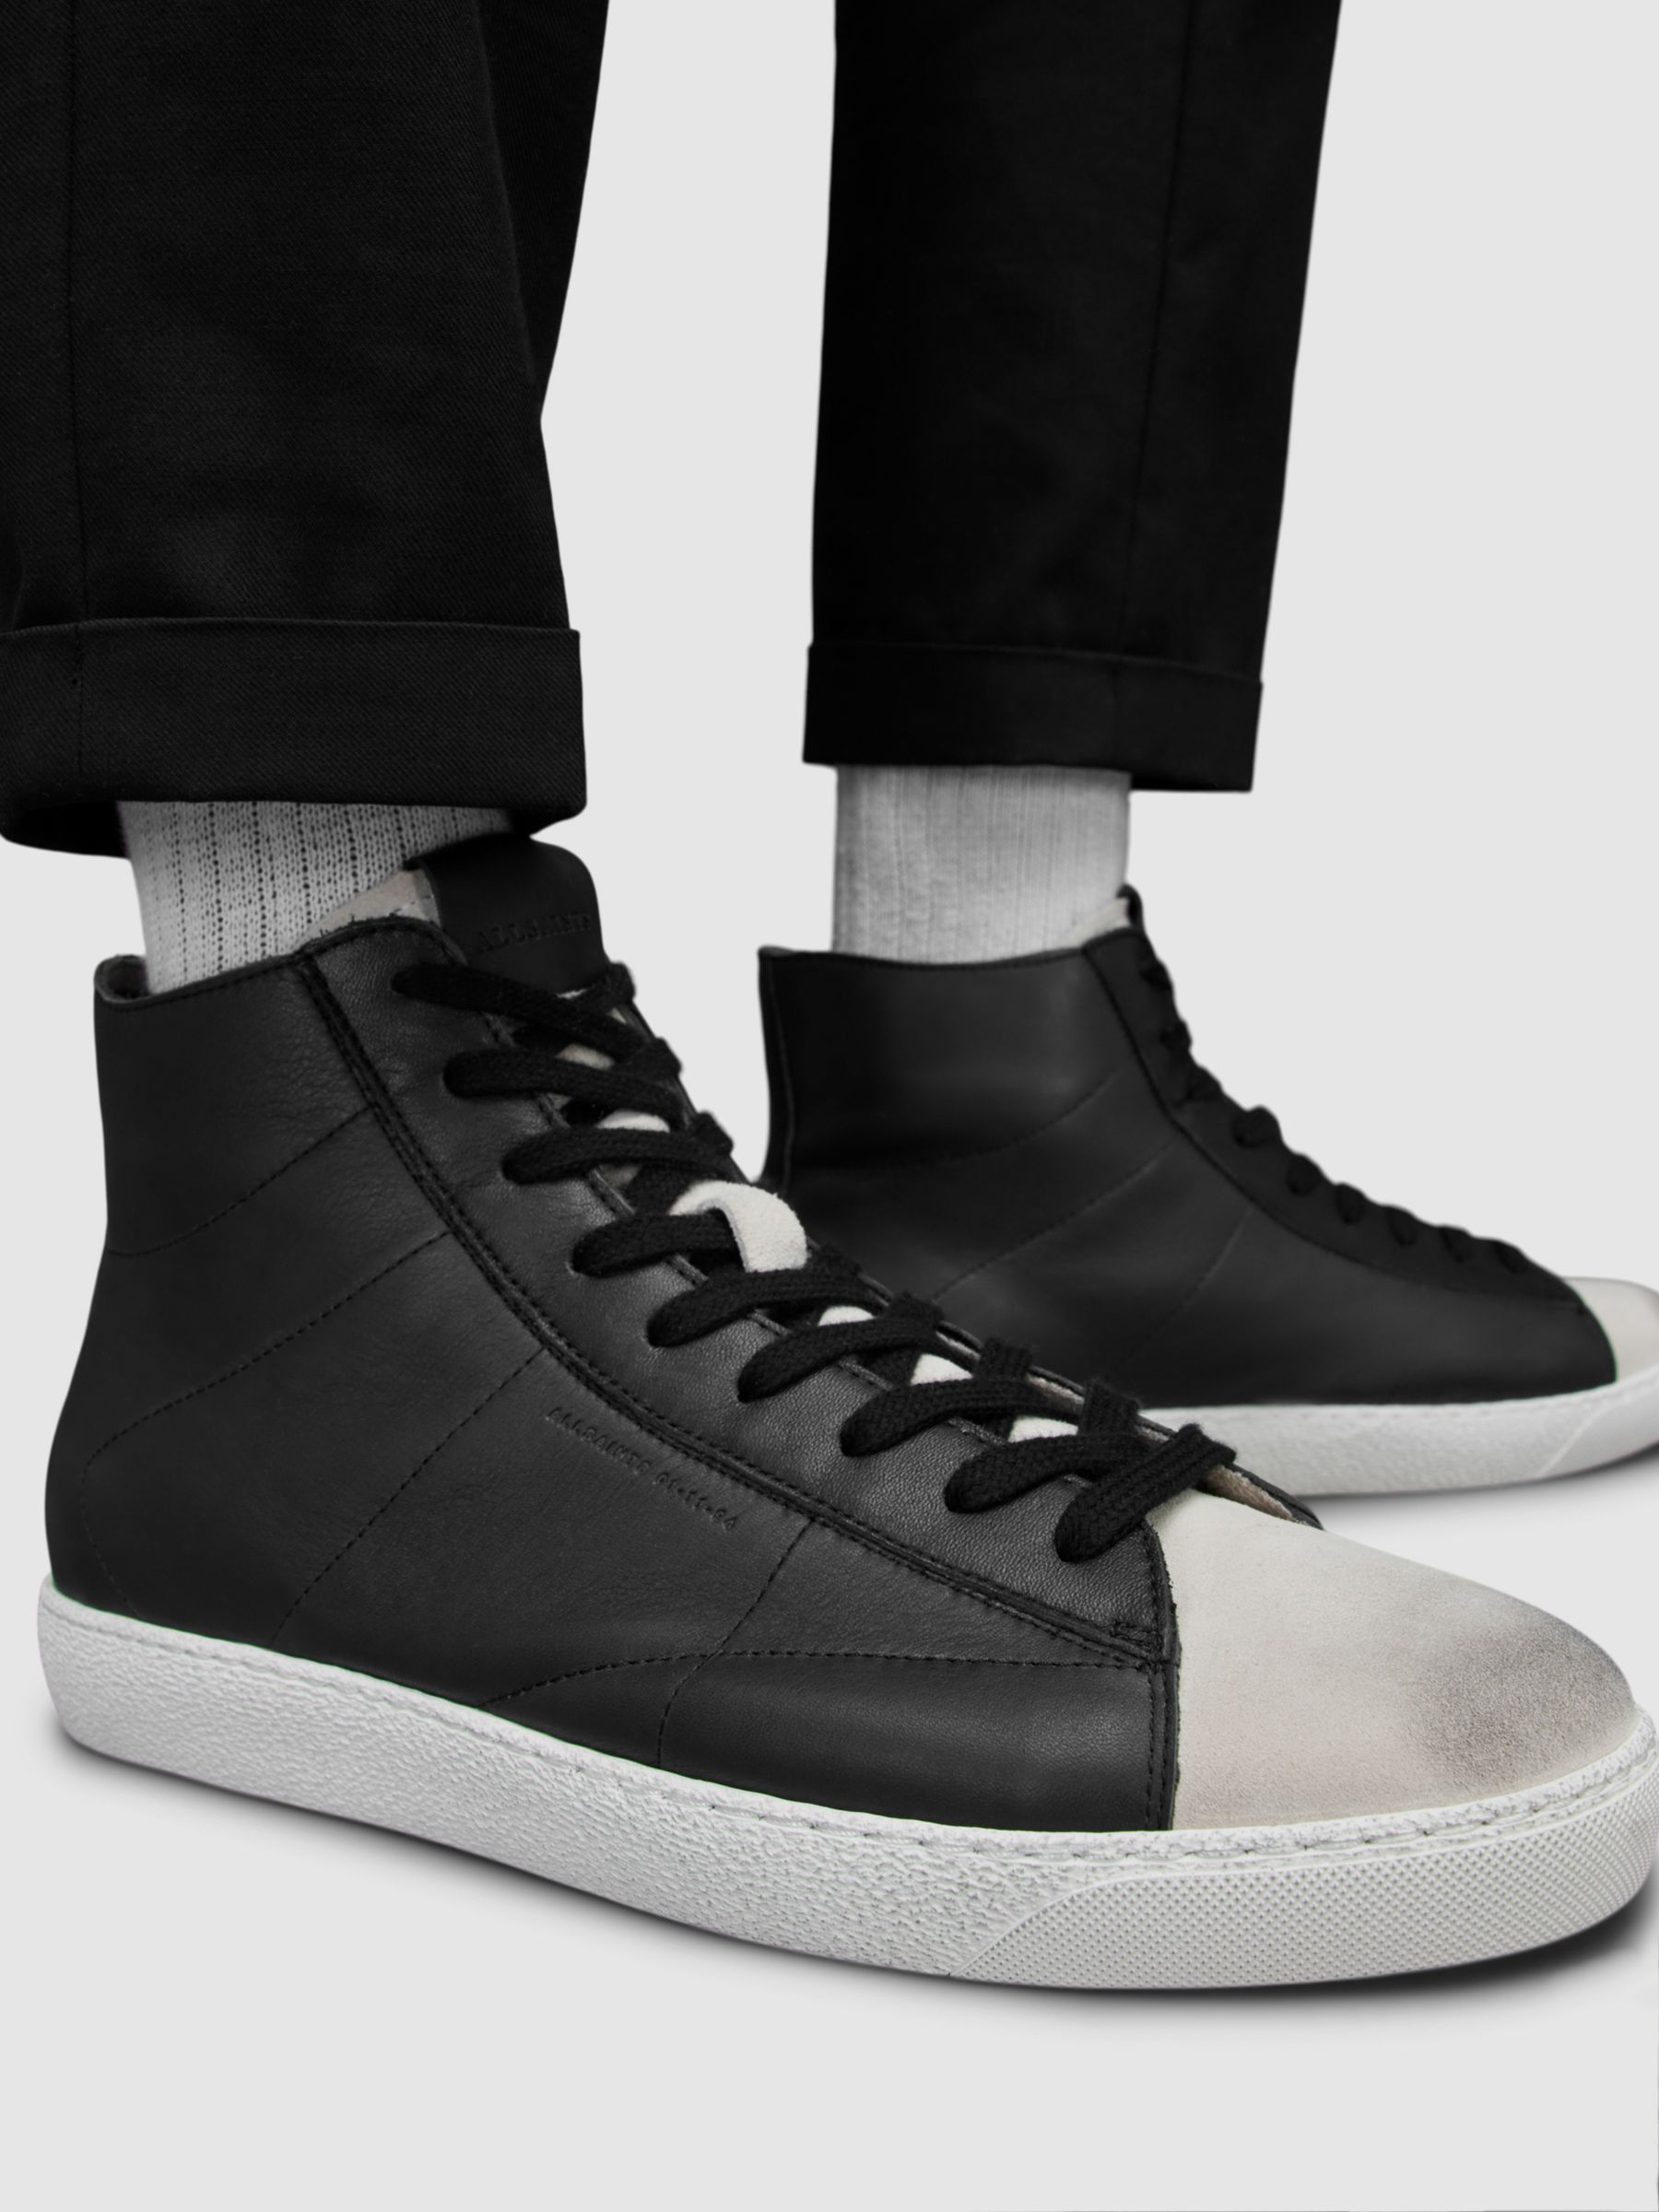 AllSaints Tundy Logo Leather Hi-Top Trainers, Black/White at John Lewis ...